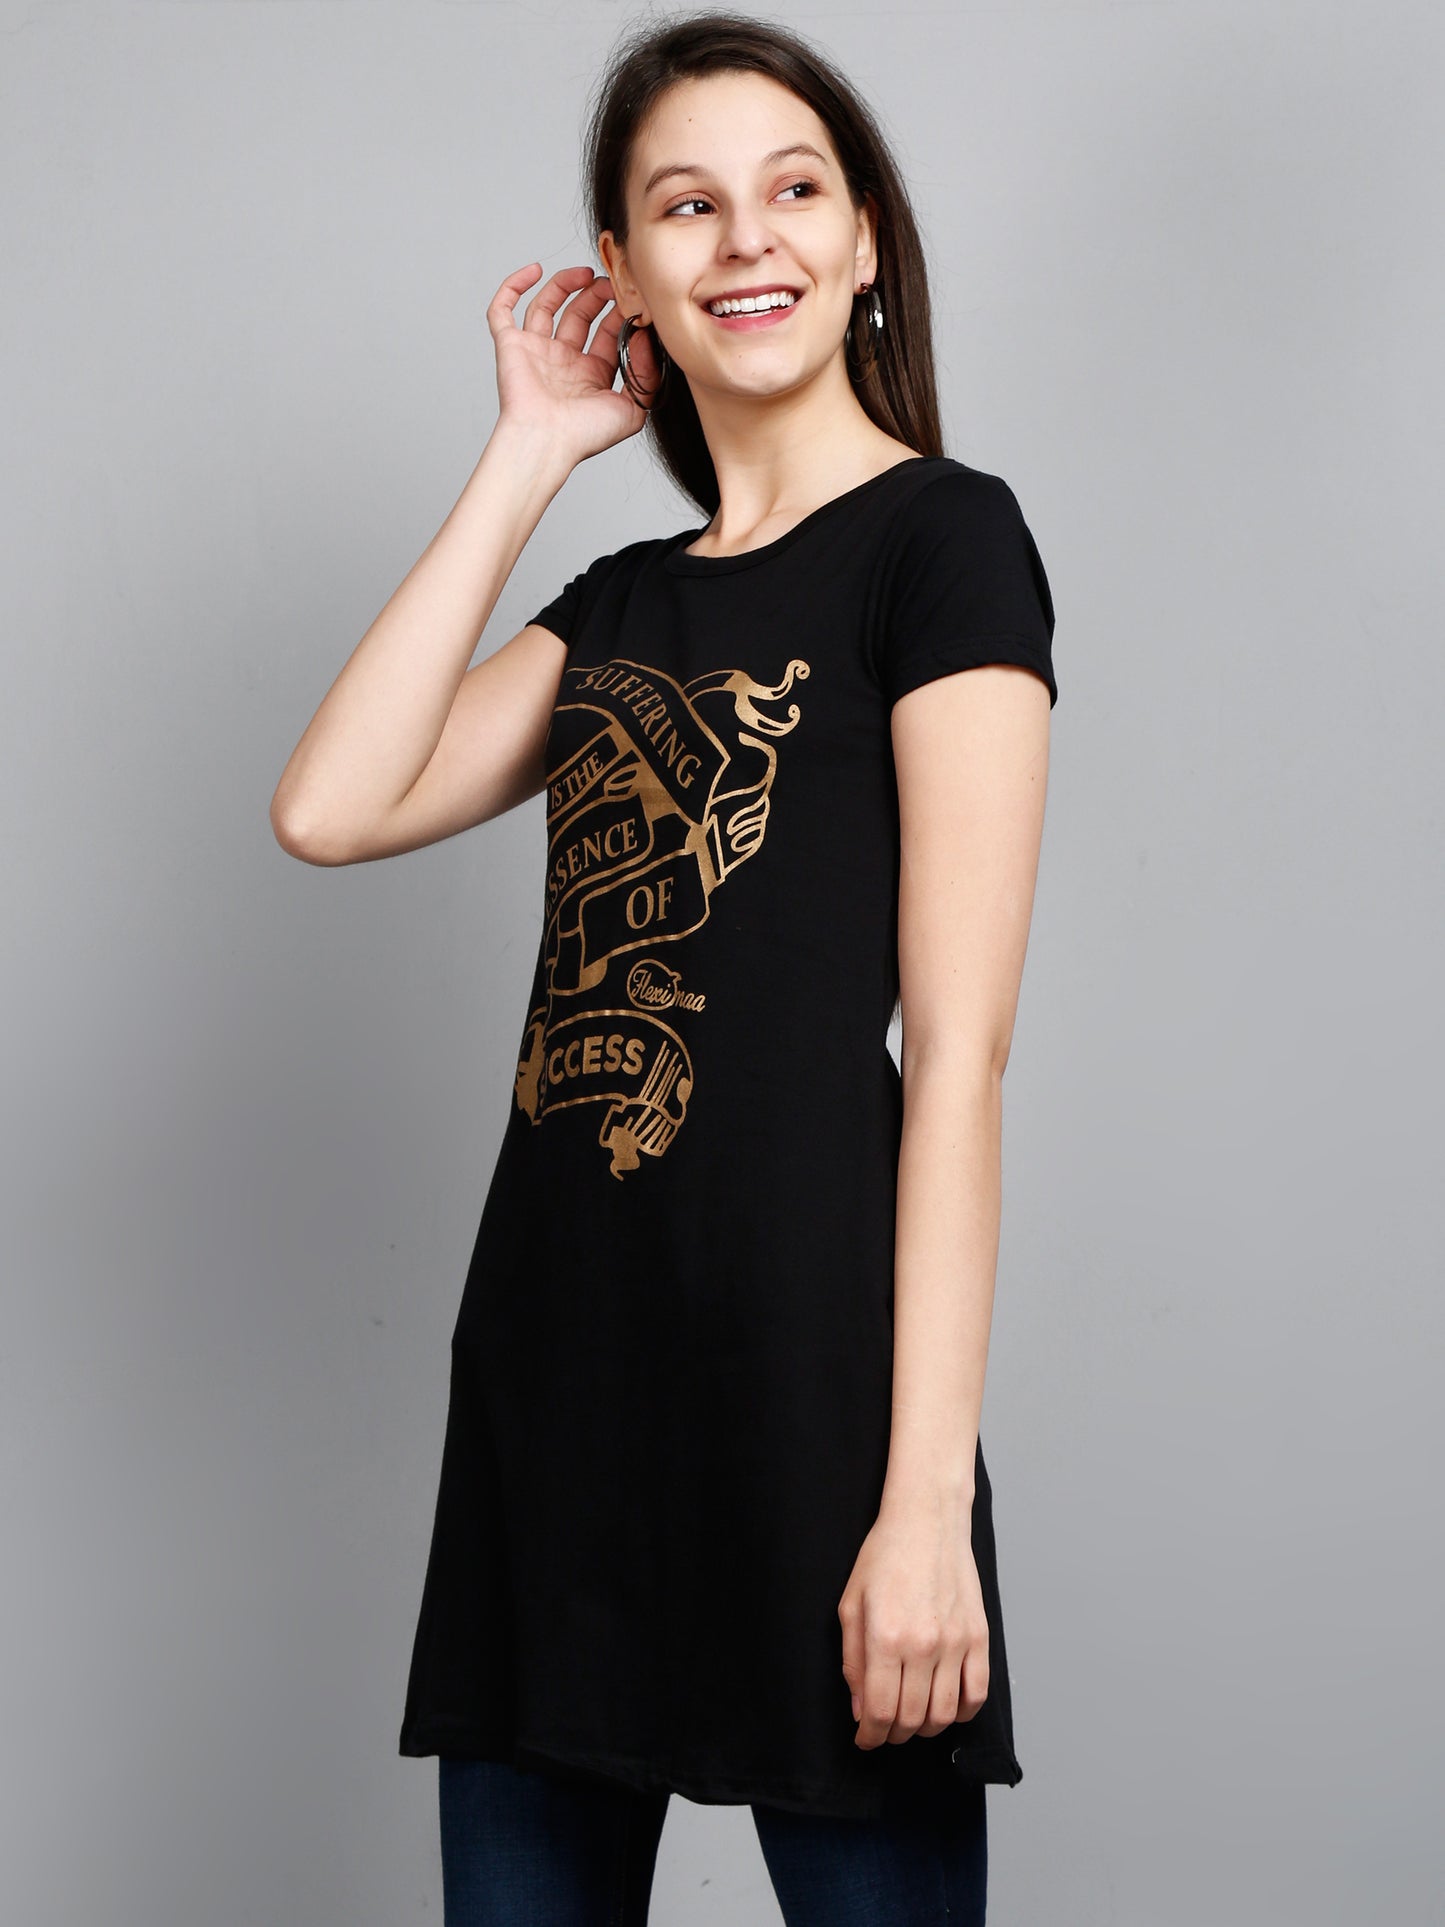 Women's Cotton Round Neck Black Color Long Top Chest Printed with Side Cut